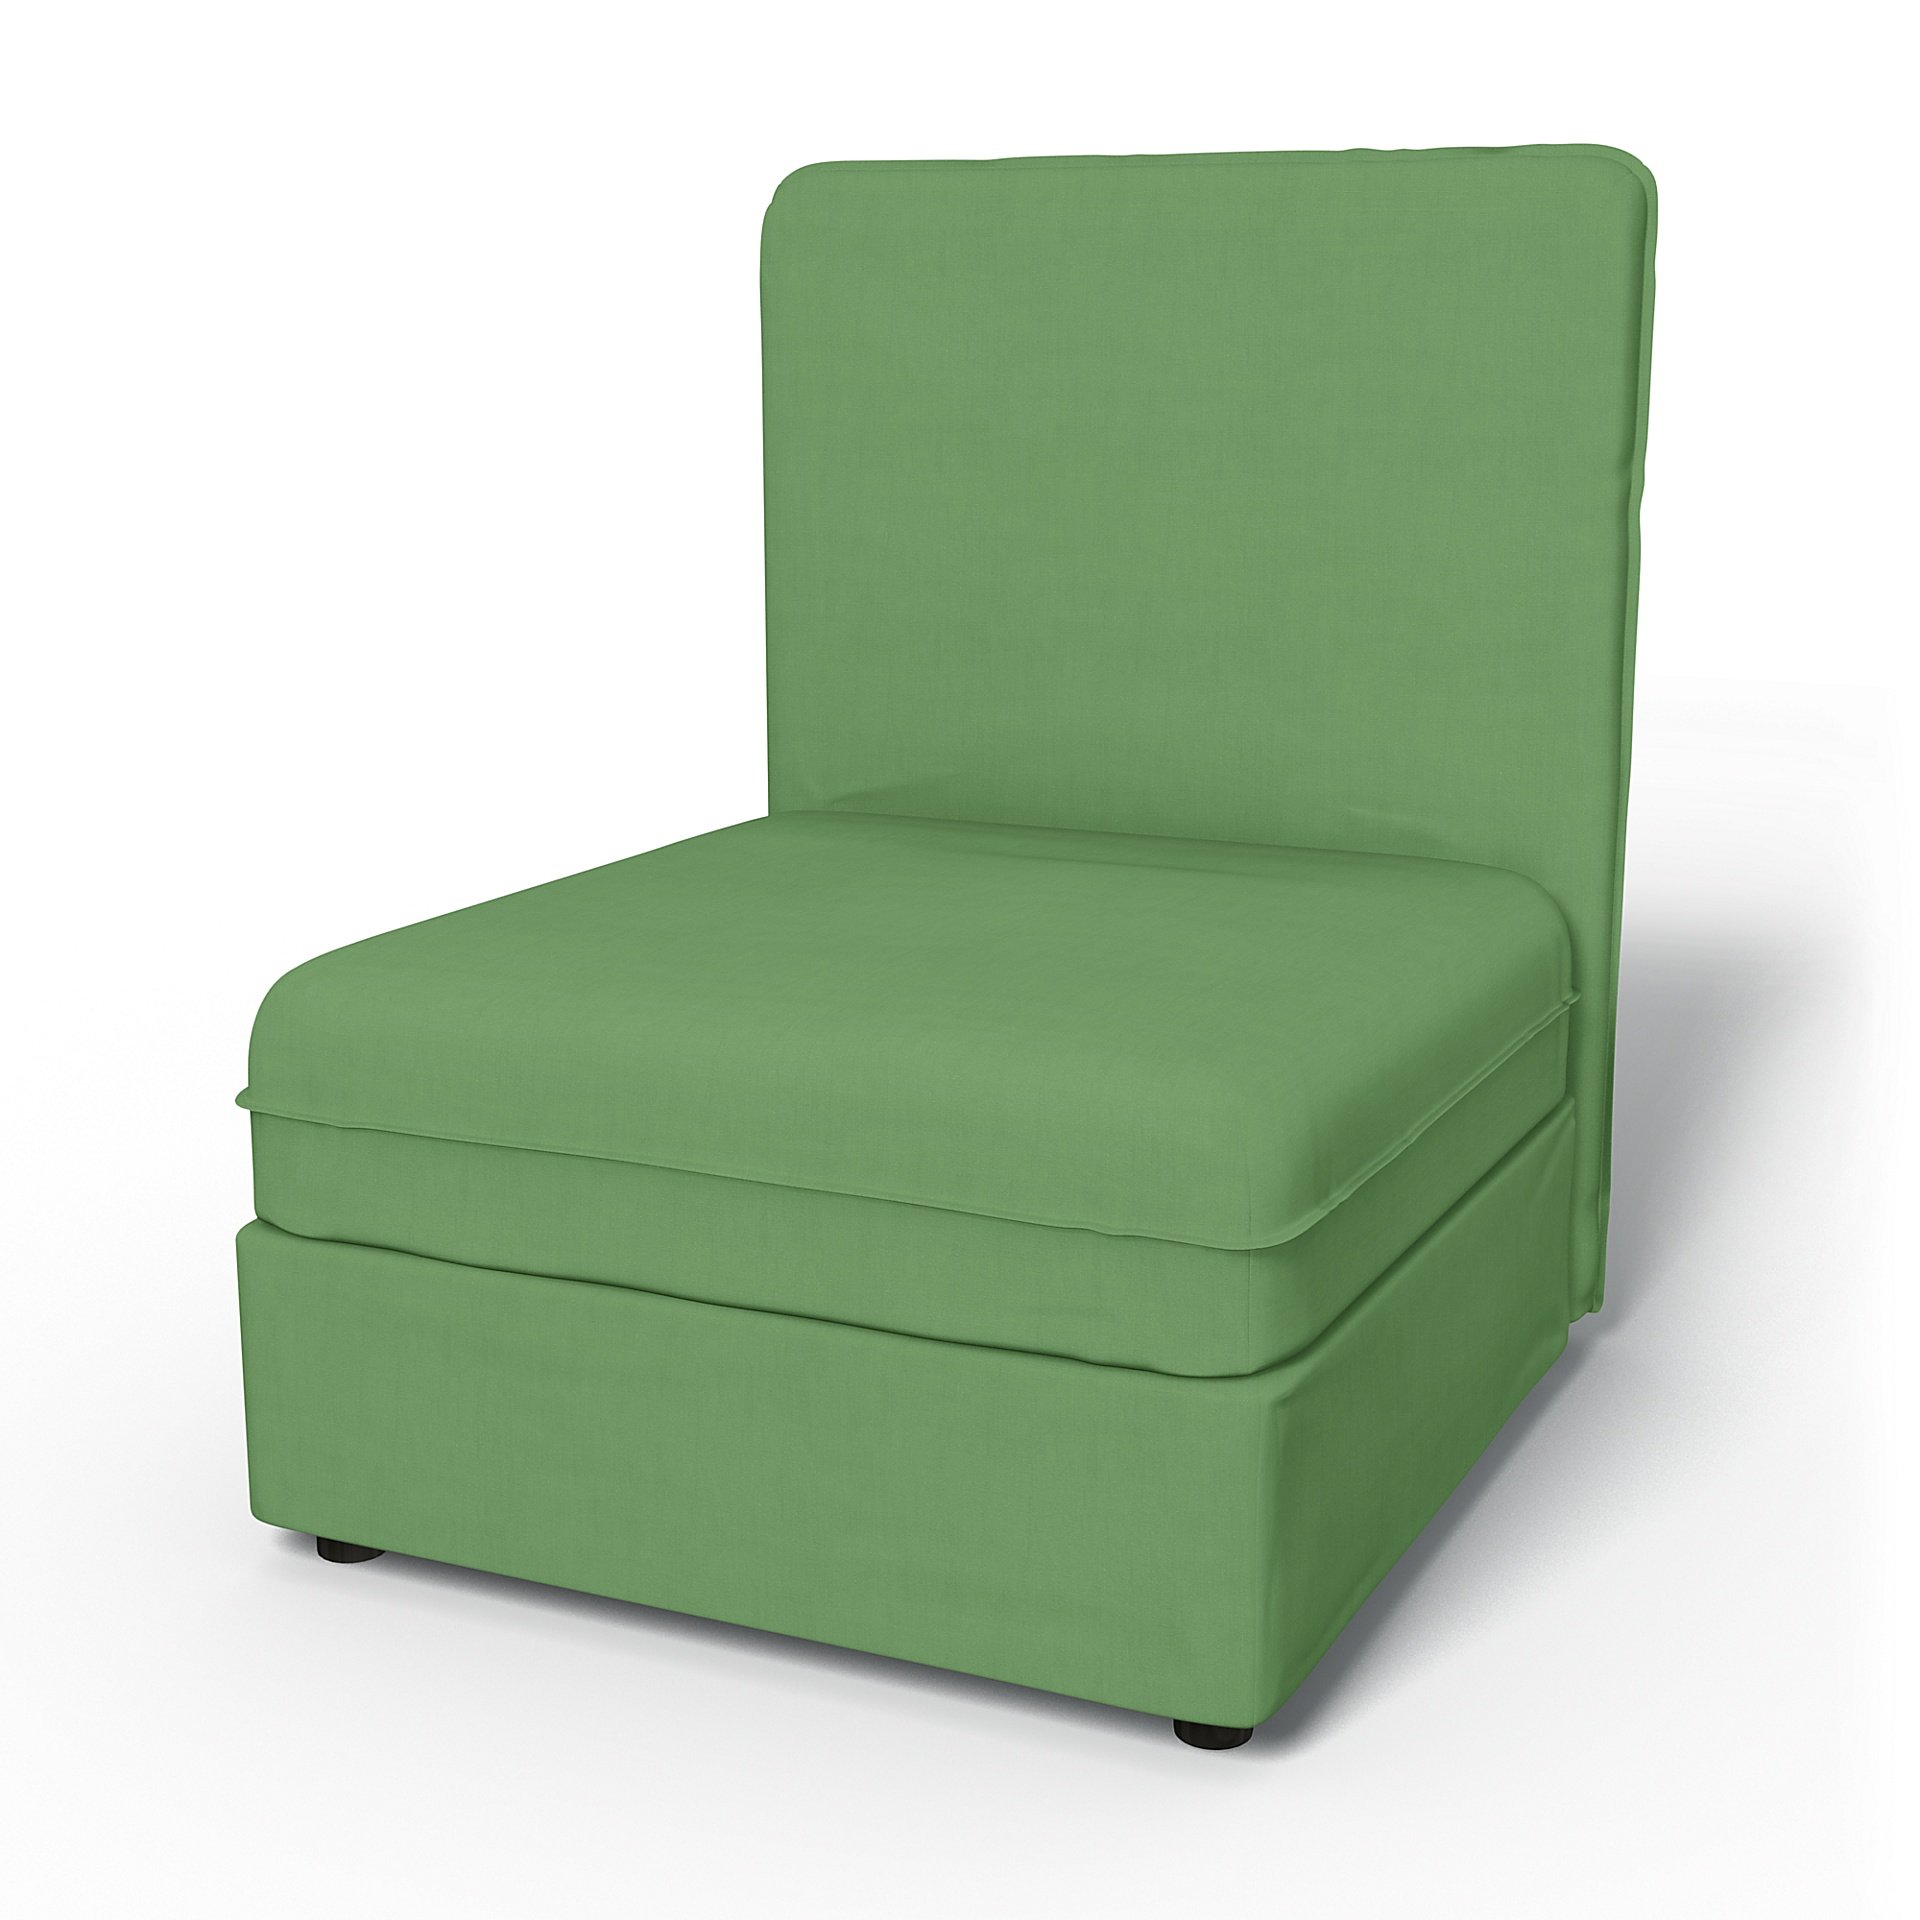 IKEA - Vallentuna Seat Module with High Back and Storage Cover 80x100cm 32x39in, Apple Green, Linen 